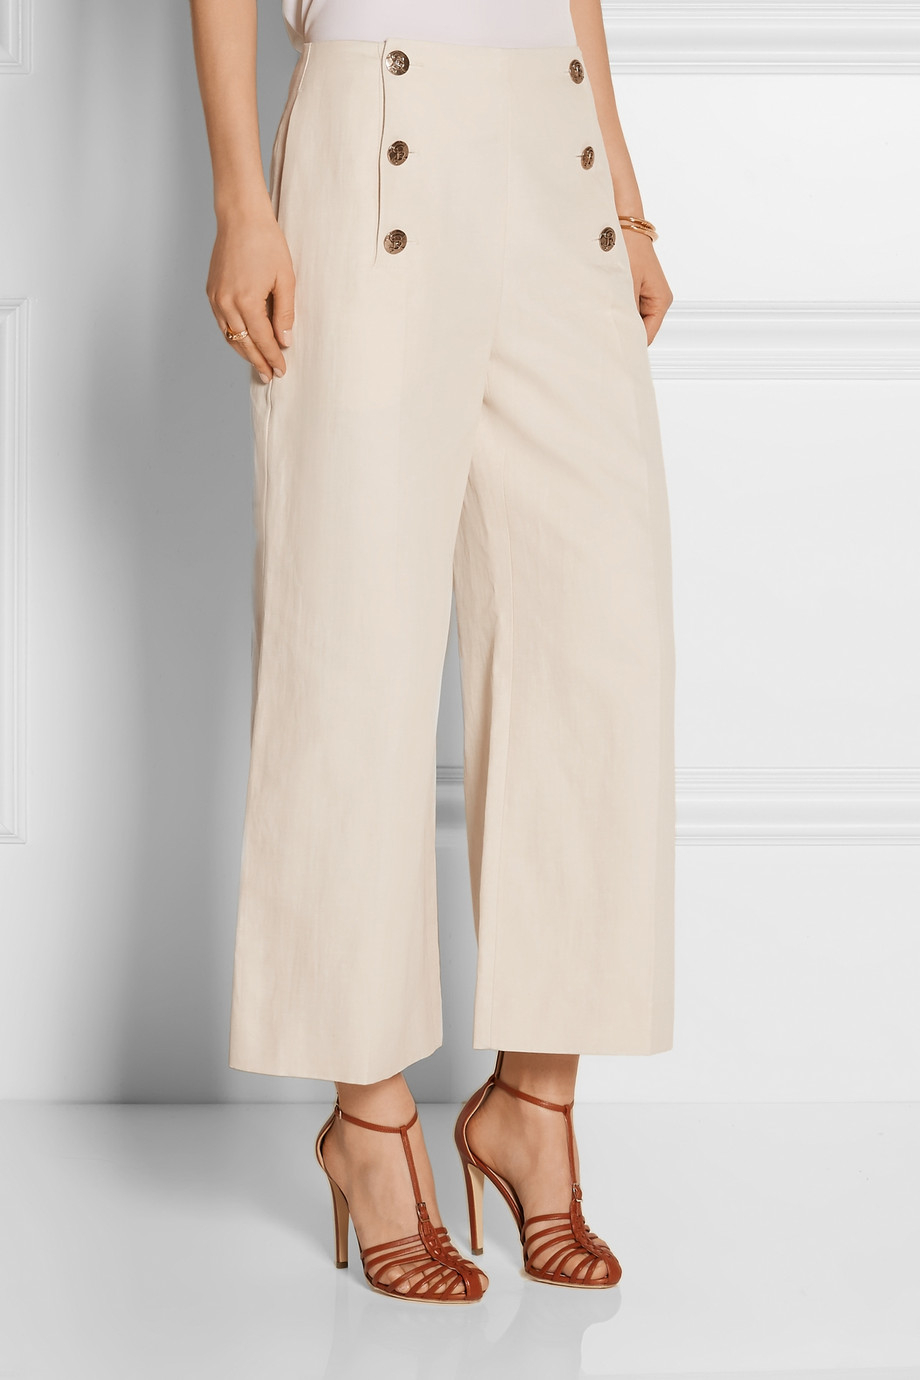 Sonia rykiel Cropped Linen And Cotton-Blend Wide-Leg Pants in White | Lyst